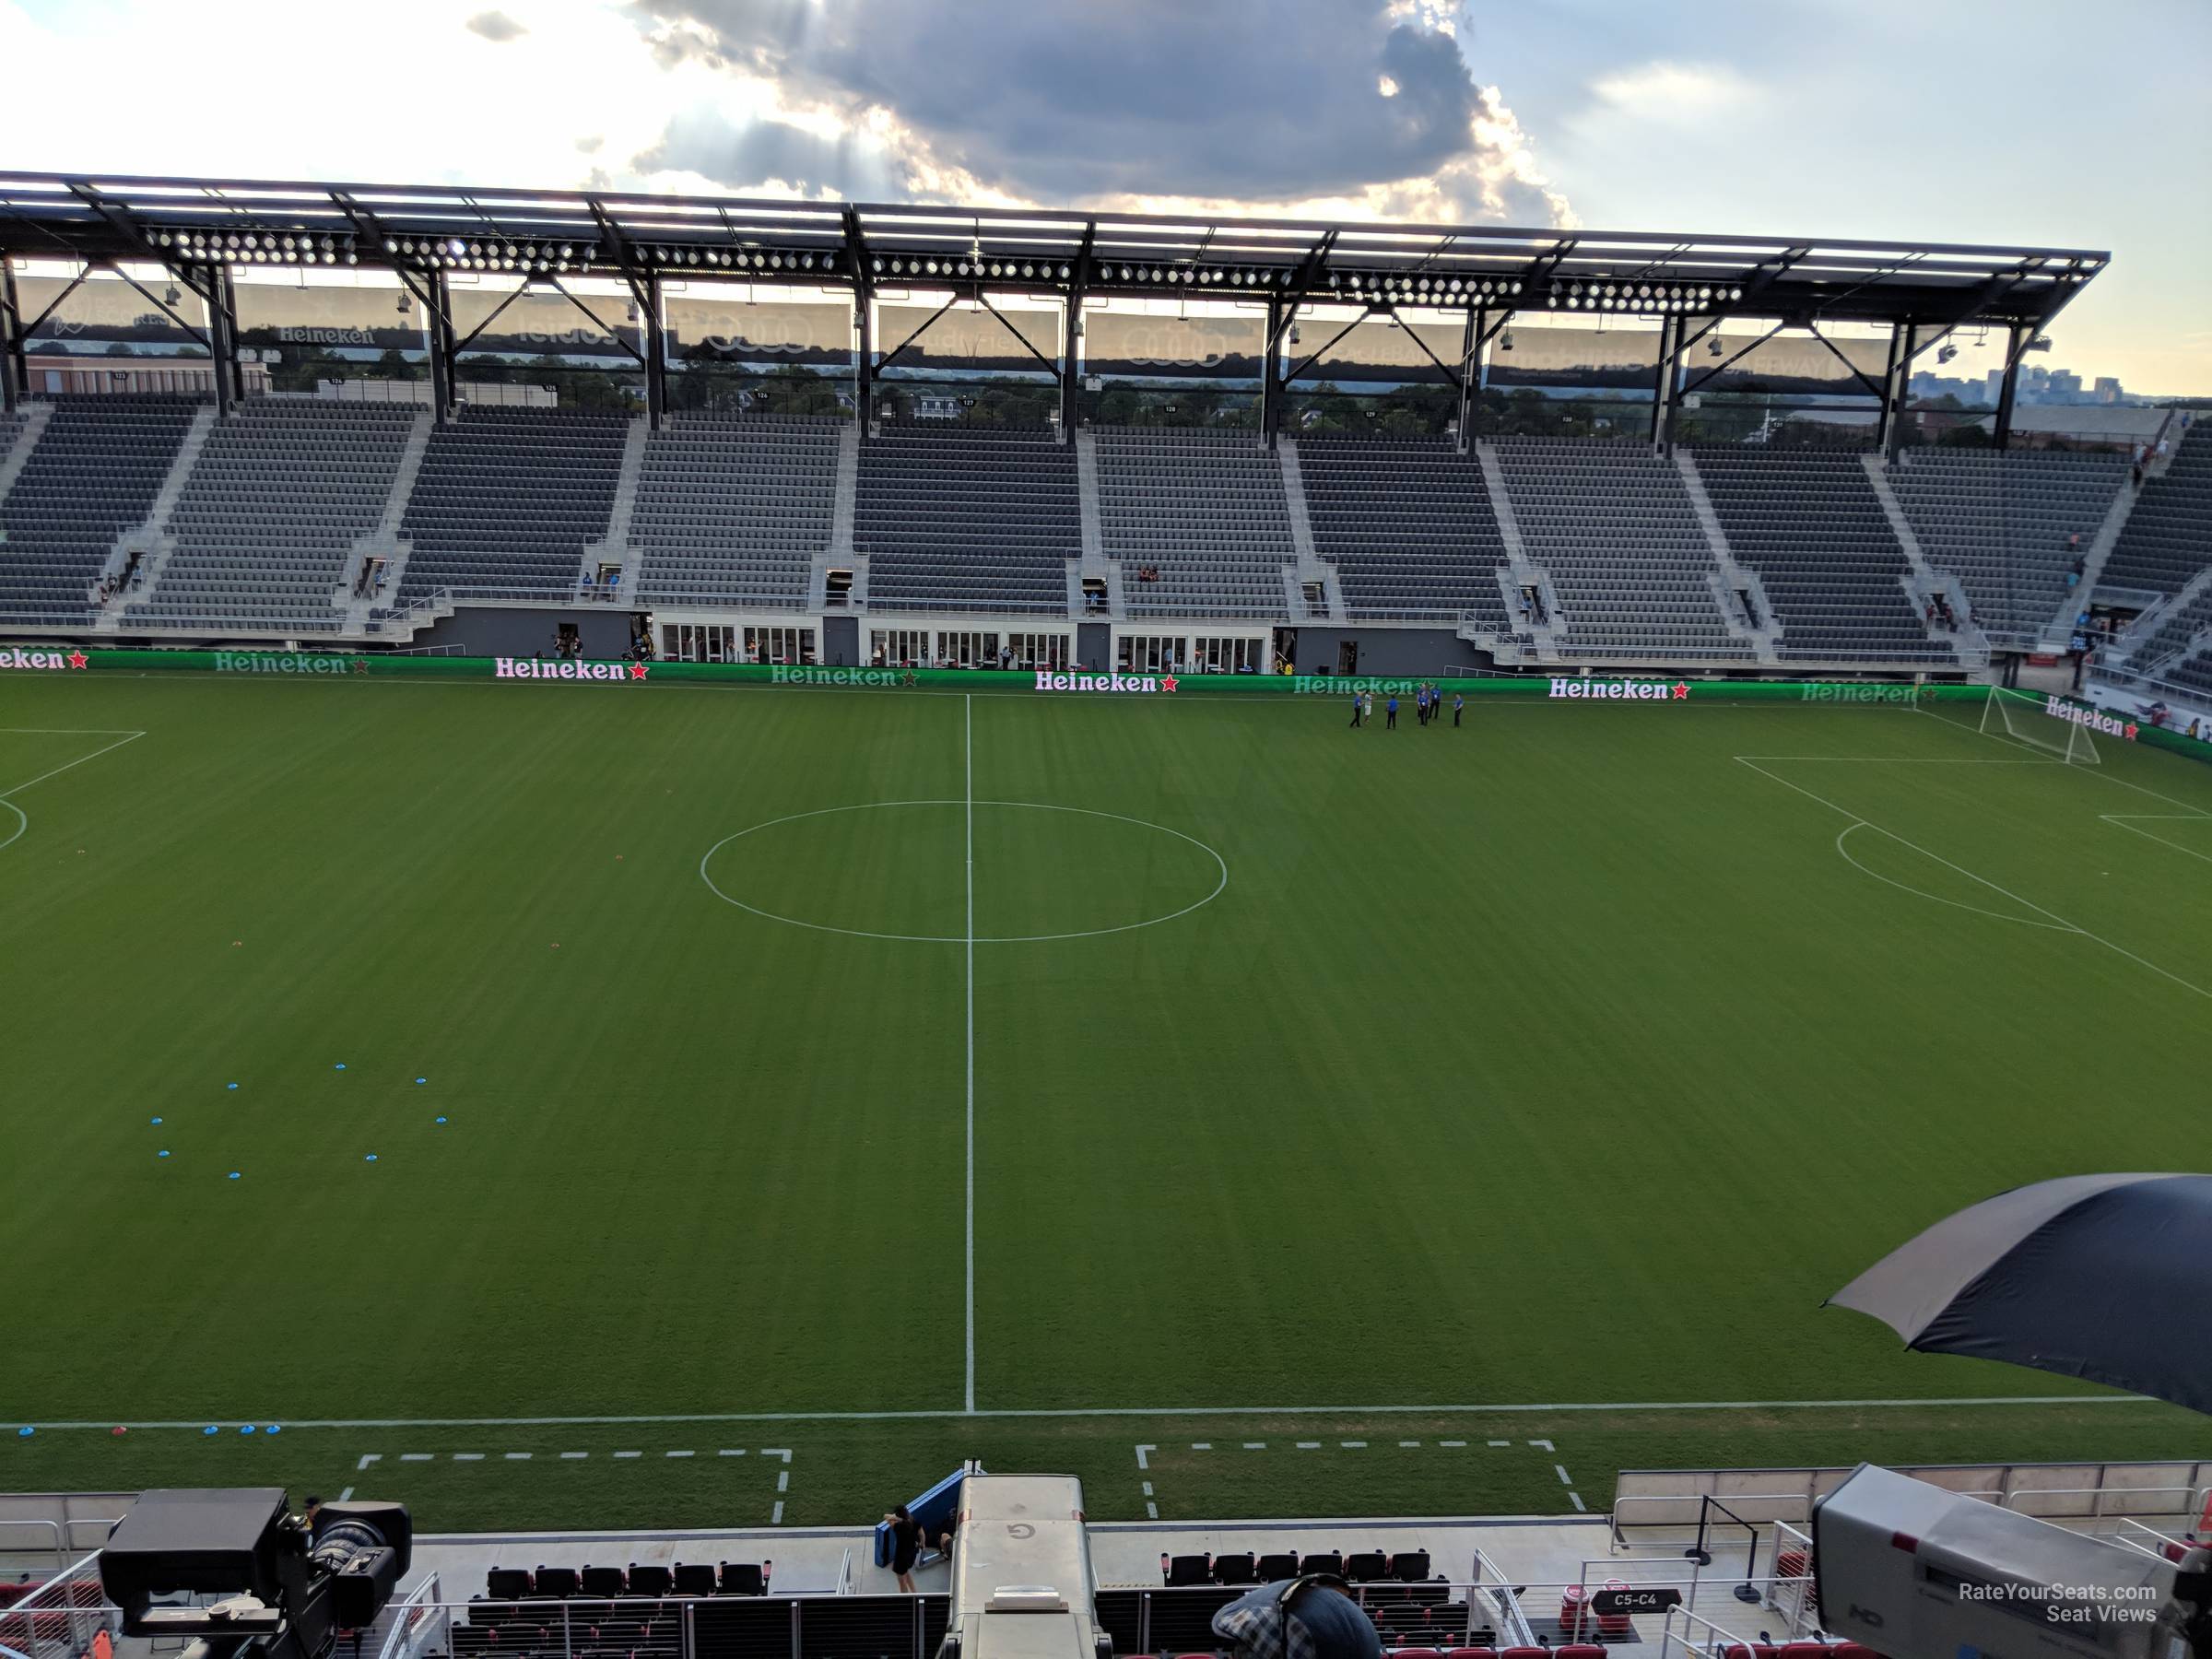 section 106, row 4 seat view  - audi field